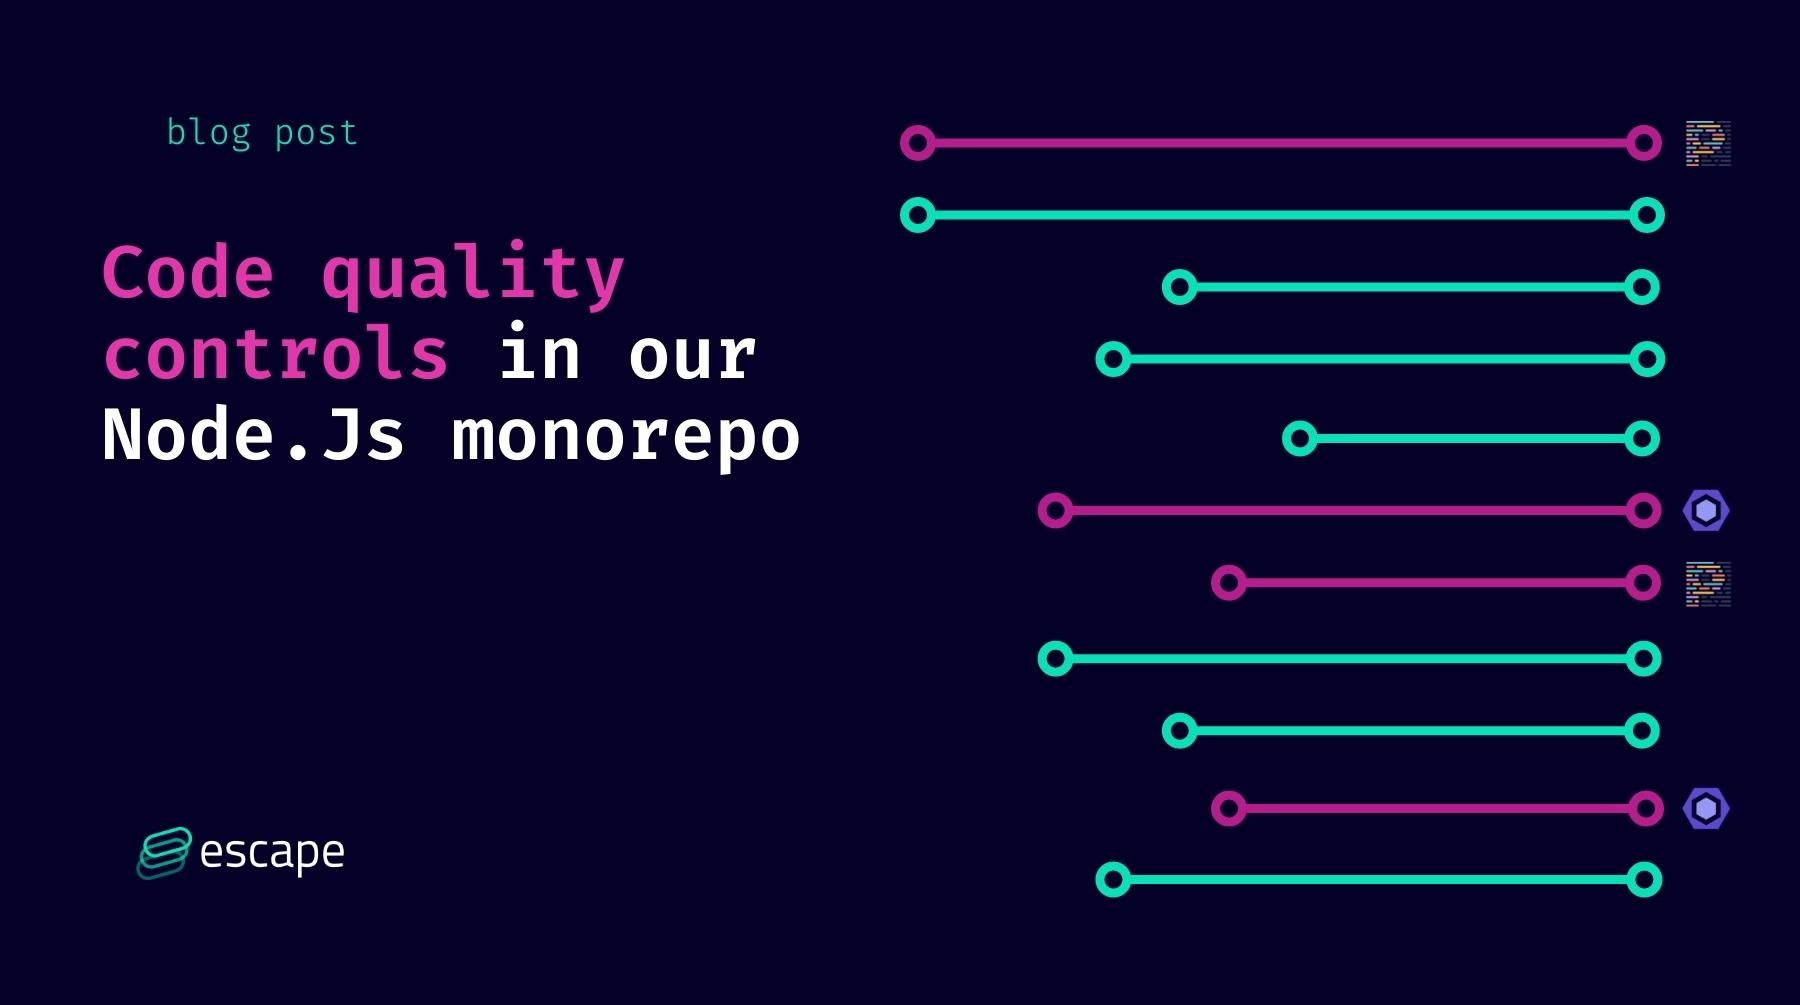 Code quality controls in our Node.js monorepo